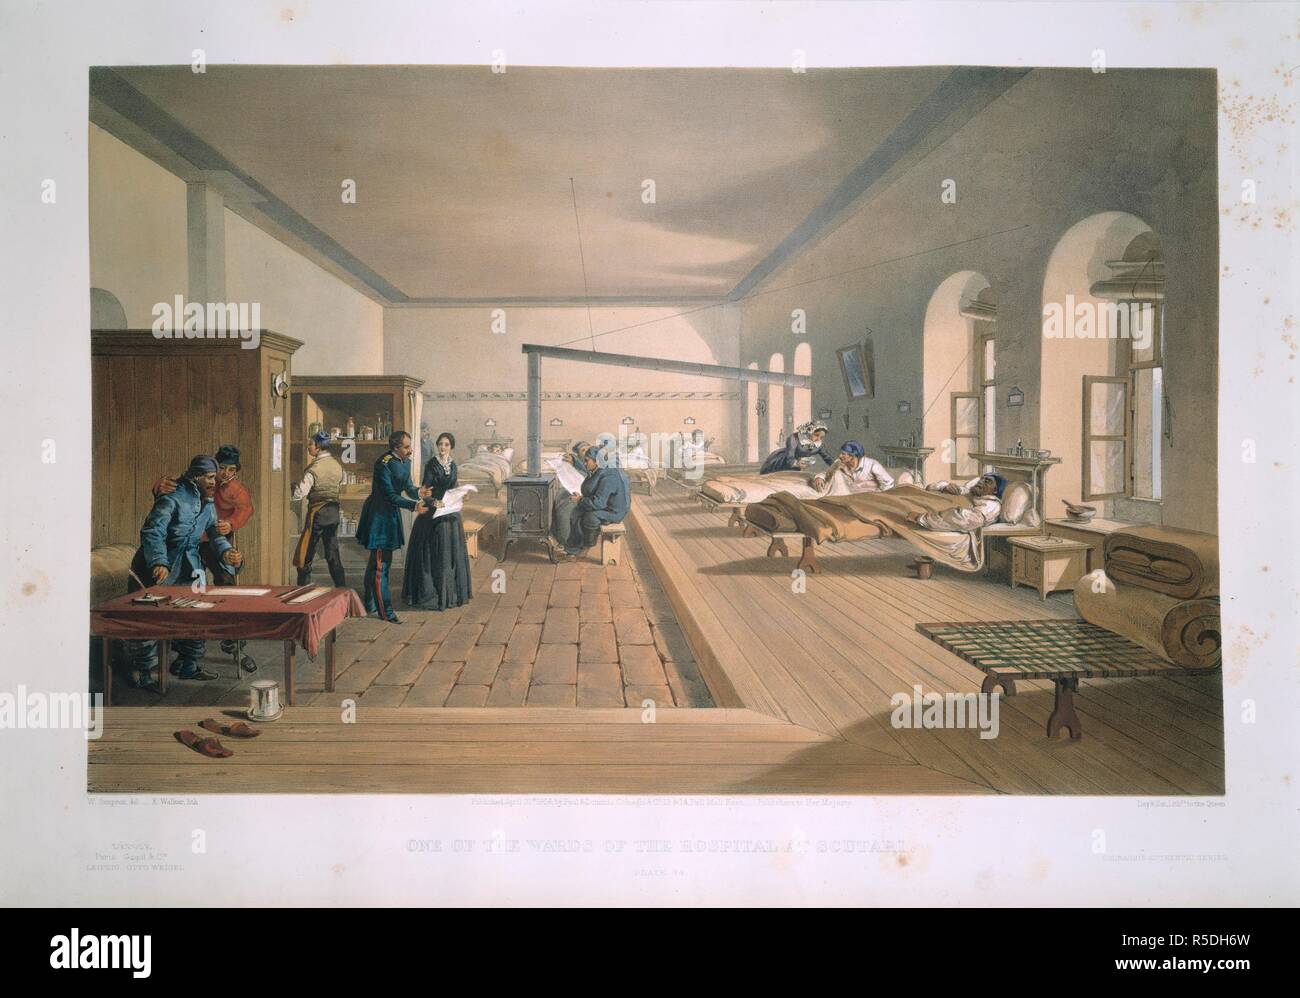 Scutari hospital ward. The Seat of War in the East (Lithographed plates,. P & D Colnaghi & Co.: London, 1855, 1866. One of the wards of the hospital at Scutari. Florence Nightingale.  Image taken from The Seat of War in the East (Lithographed plates, illustrating the Crimean War.).  Originally published/produced in P & D Colnaghi & Co.: London, 1855, 1866. . Source: 1780.c.6, XXXIV. Language: English. Author: SIMPSON, WILLIAM. WALKER E. Stock Photo